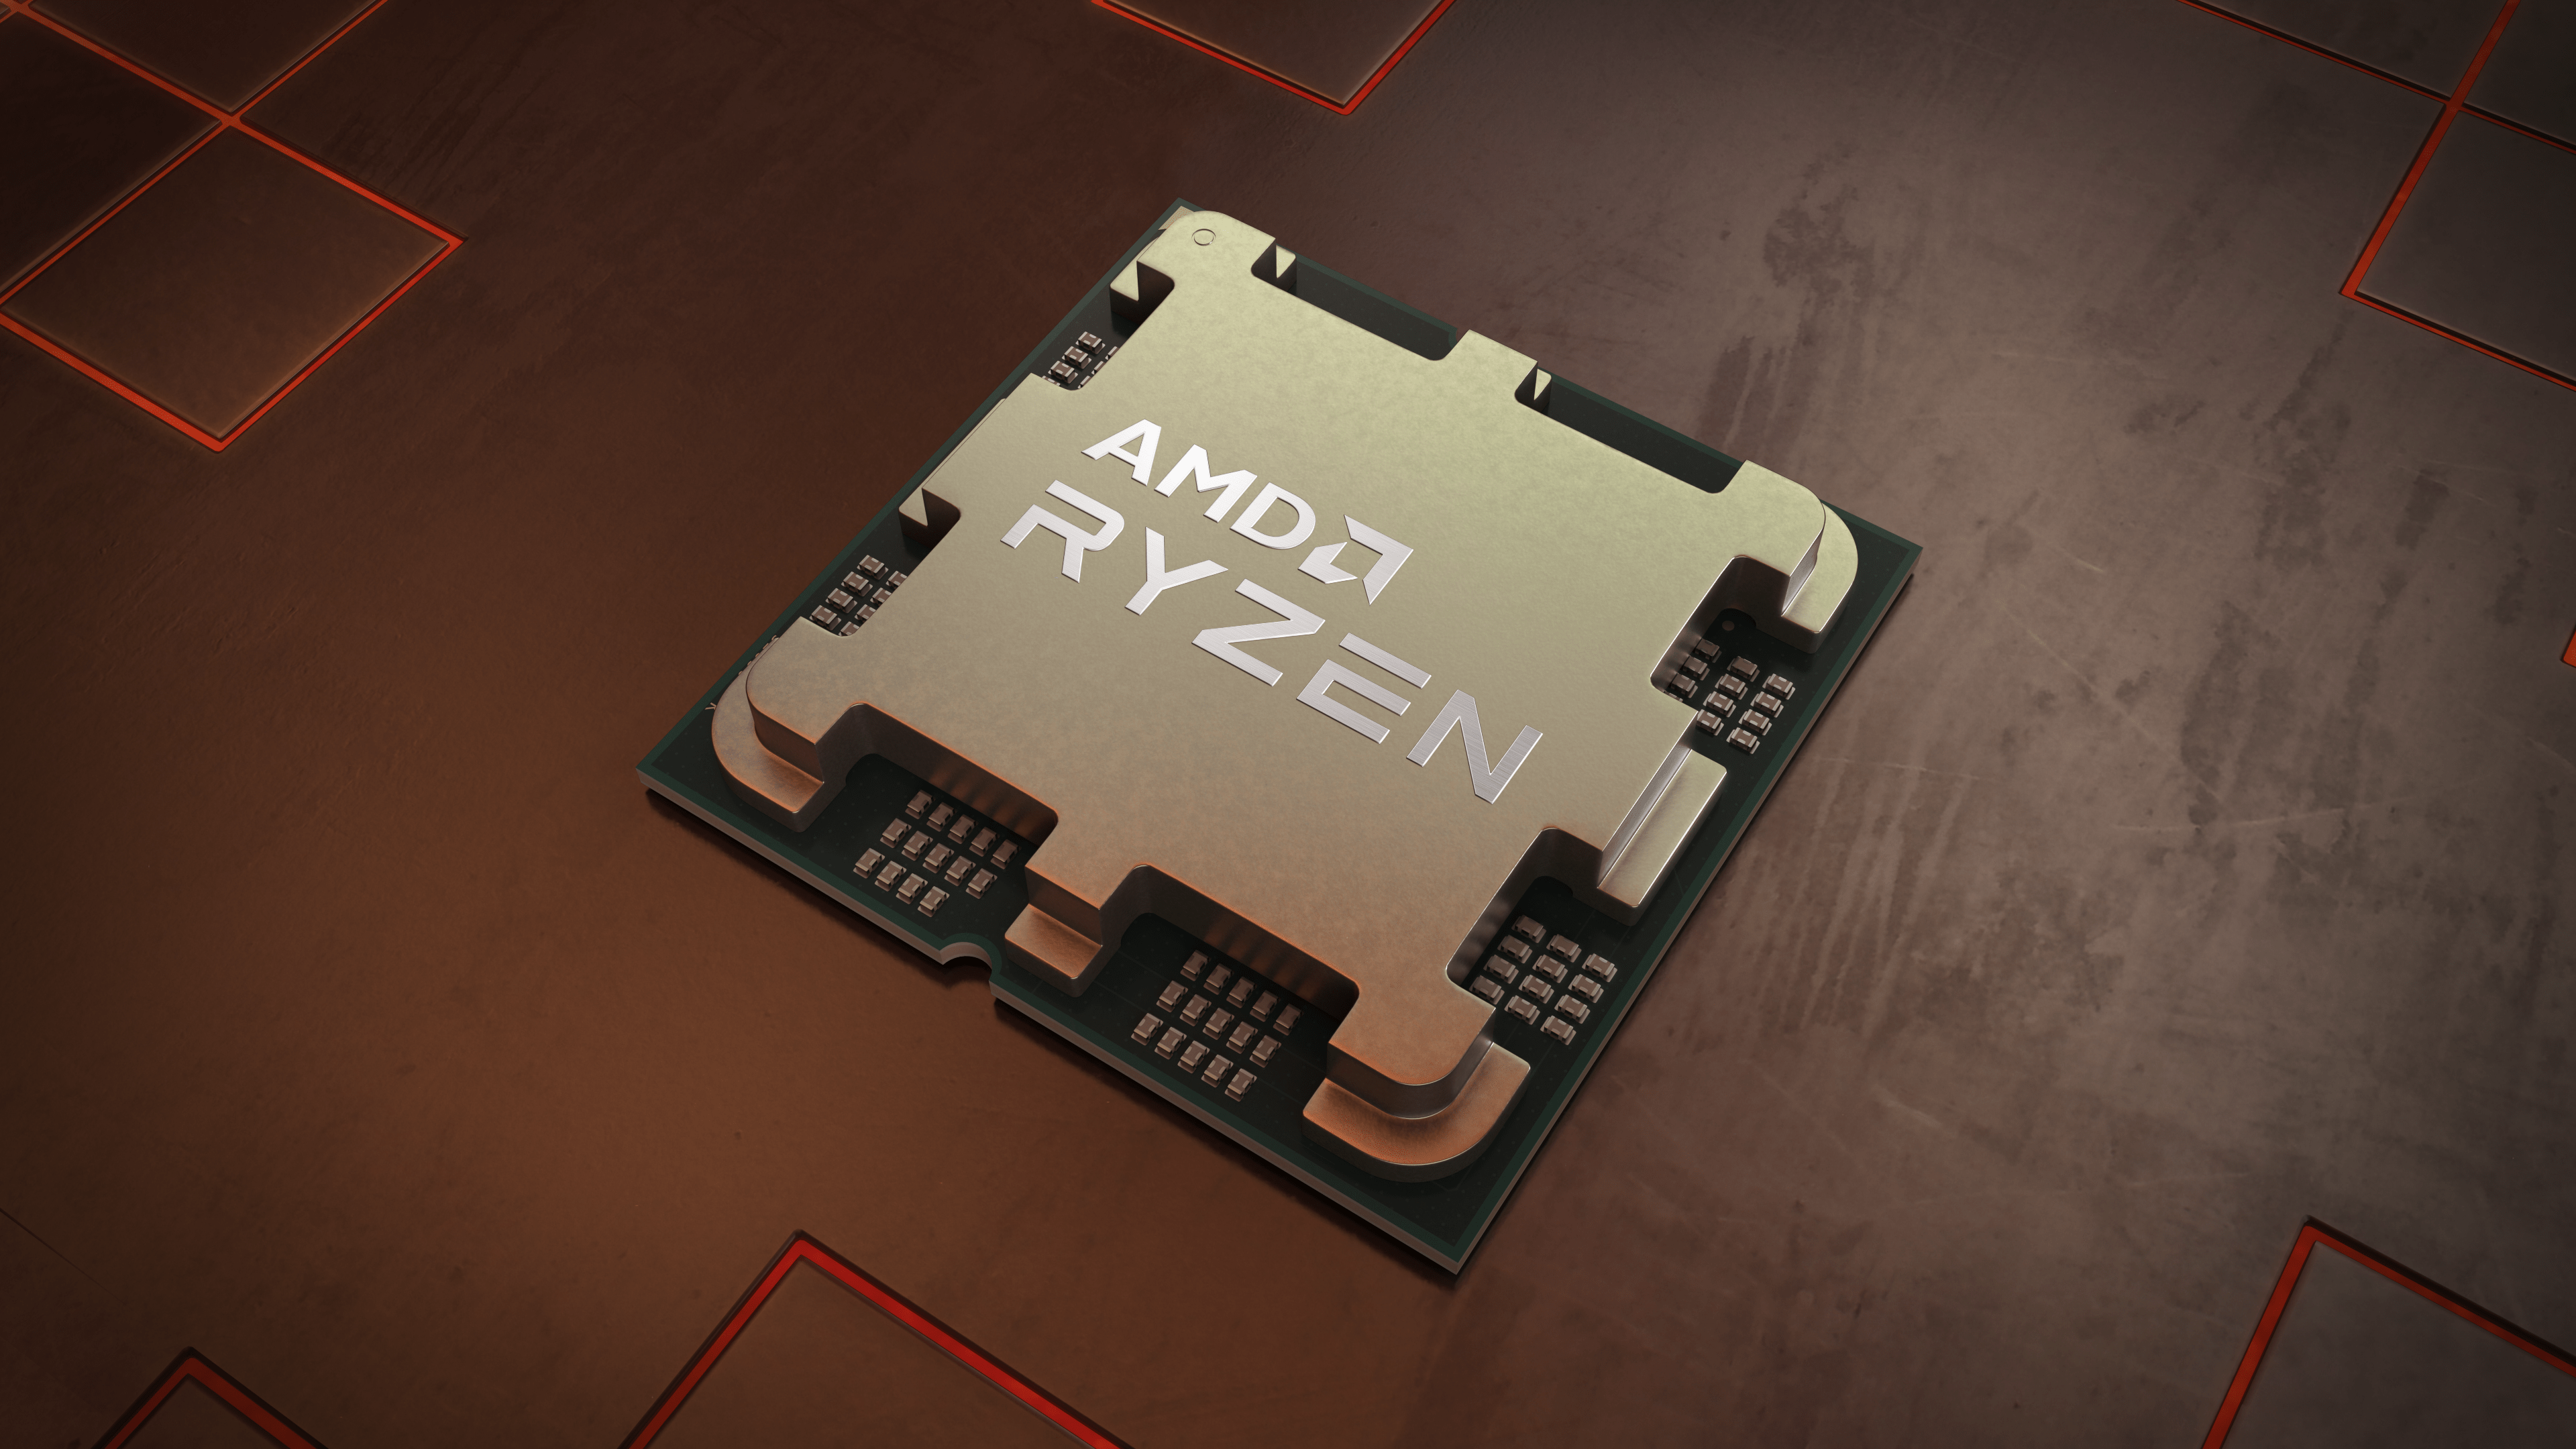 AMD Ryzen 5 7600X review: Great for gaming!